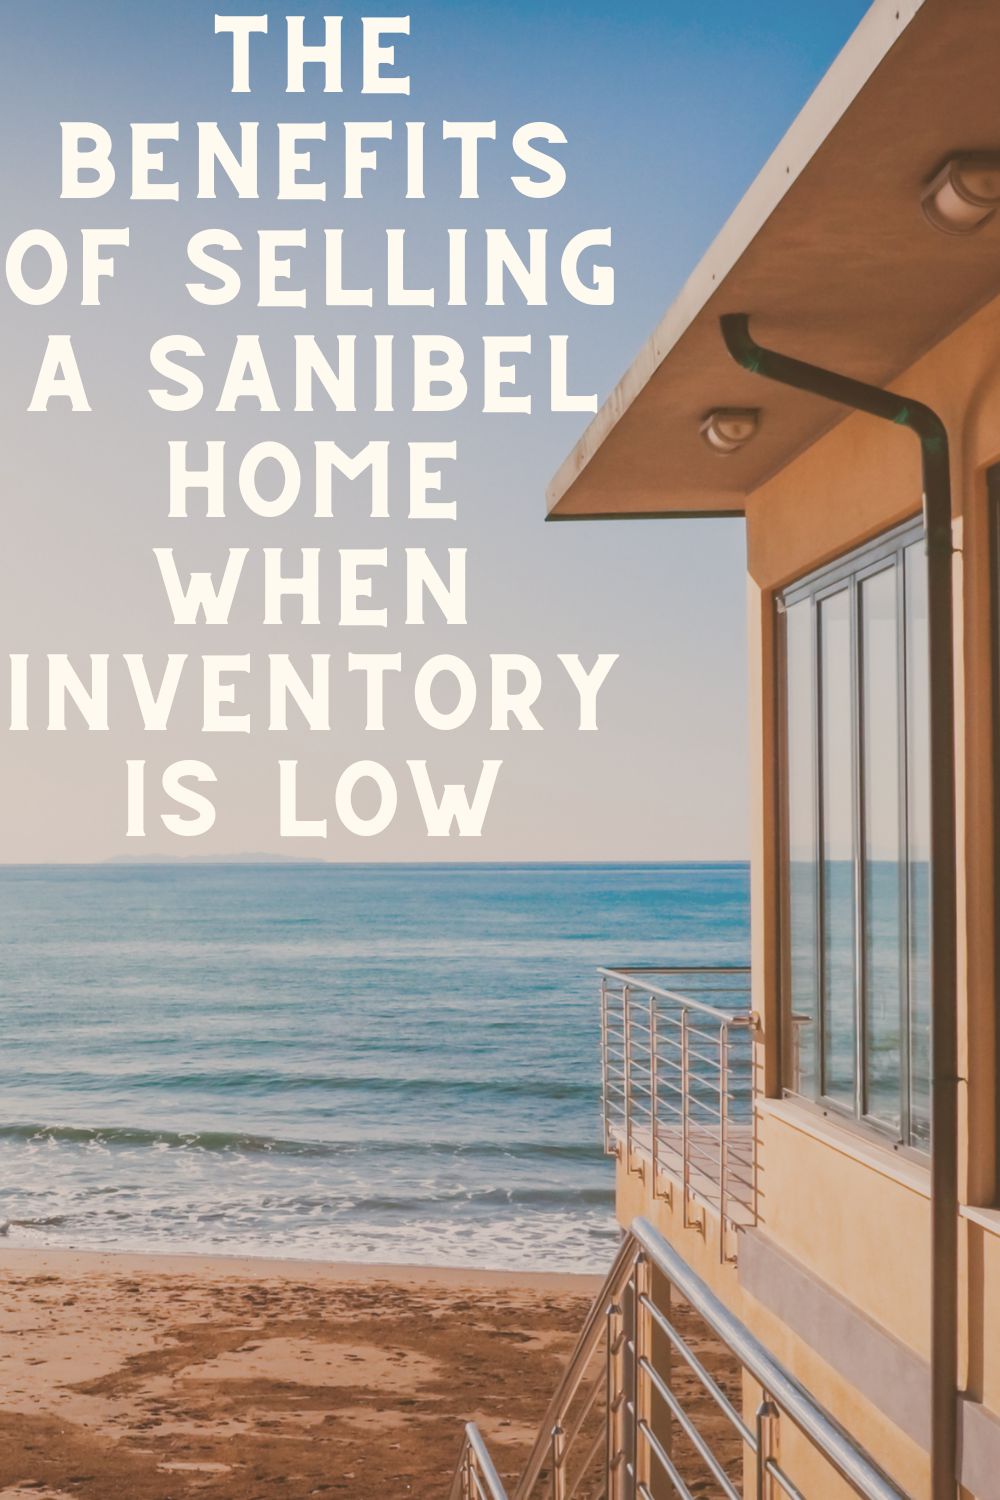 The Benefits of Selling a Sanibel Home When Inventory is Low